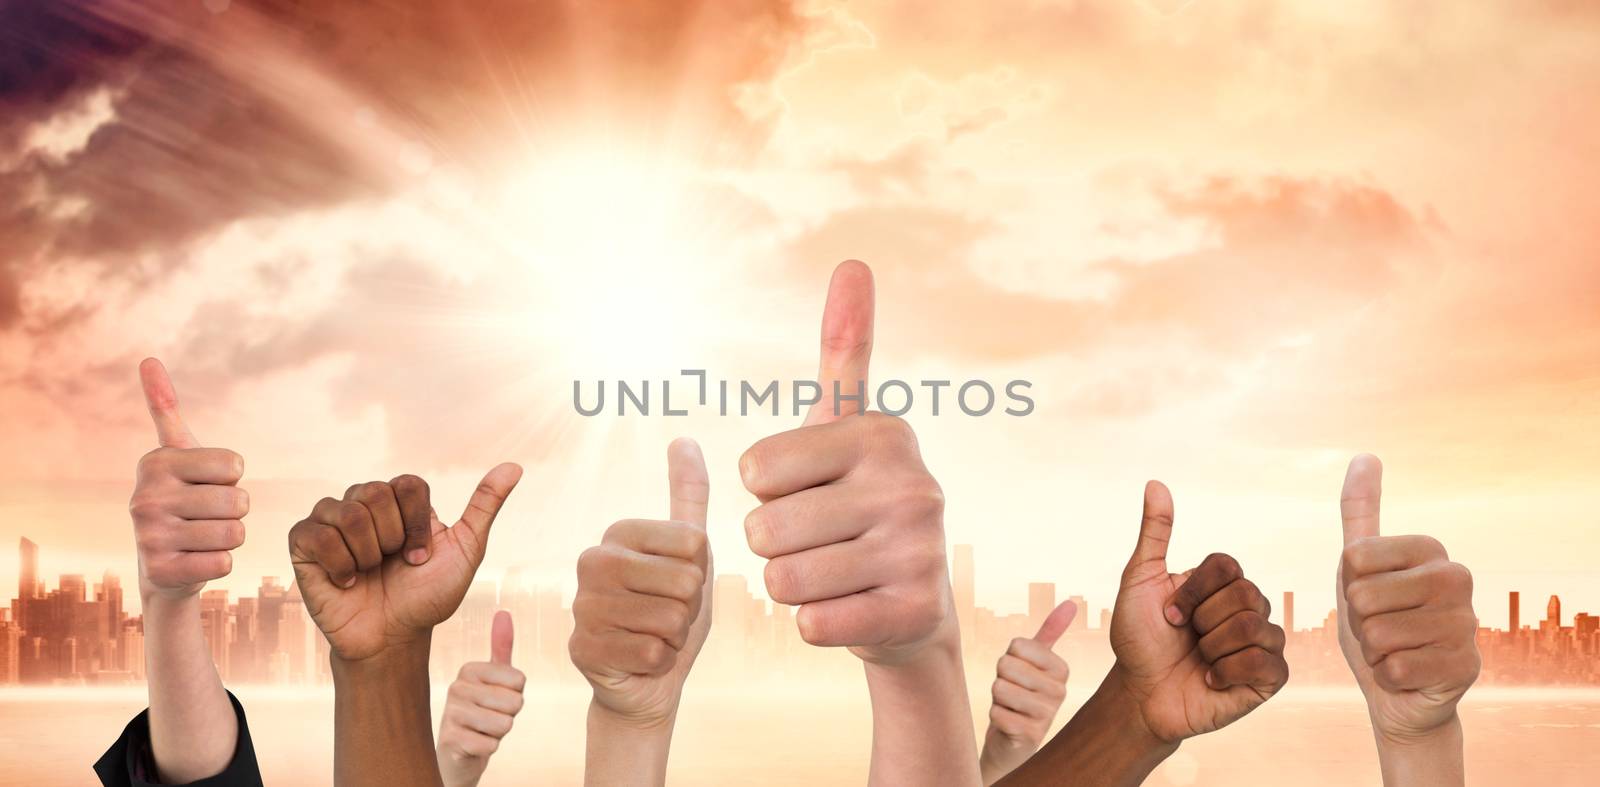 Composite image of hands showing thumbs up by Wavebreakmedia